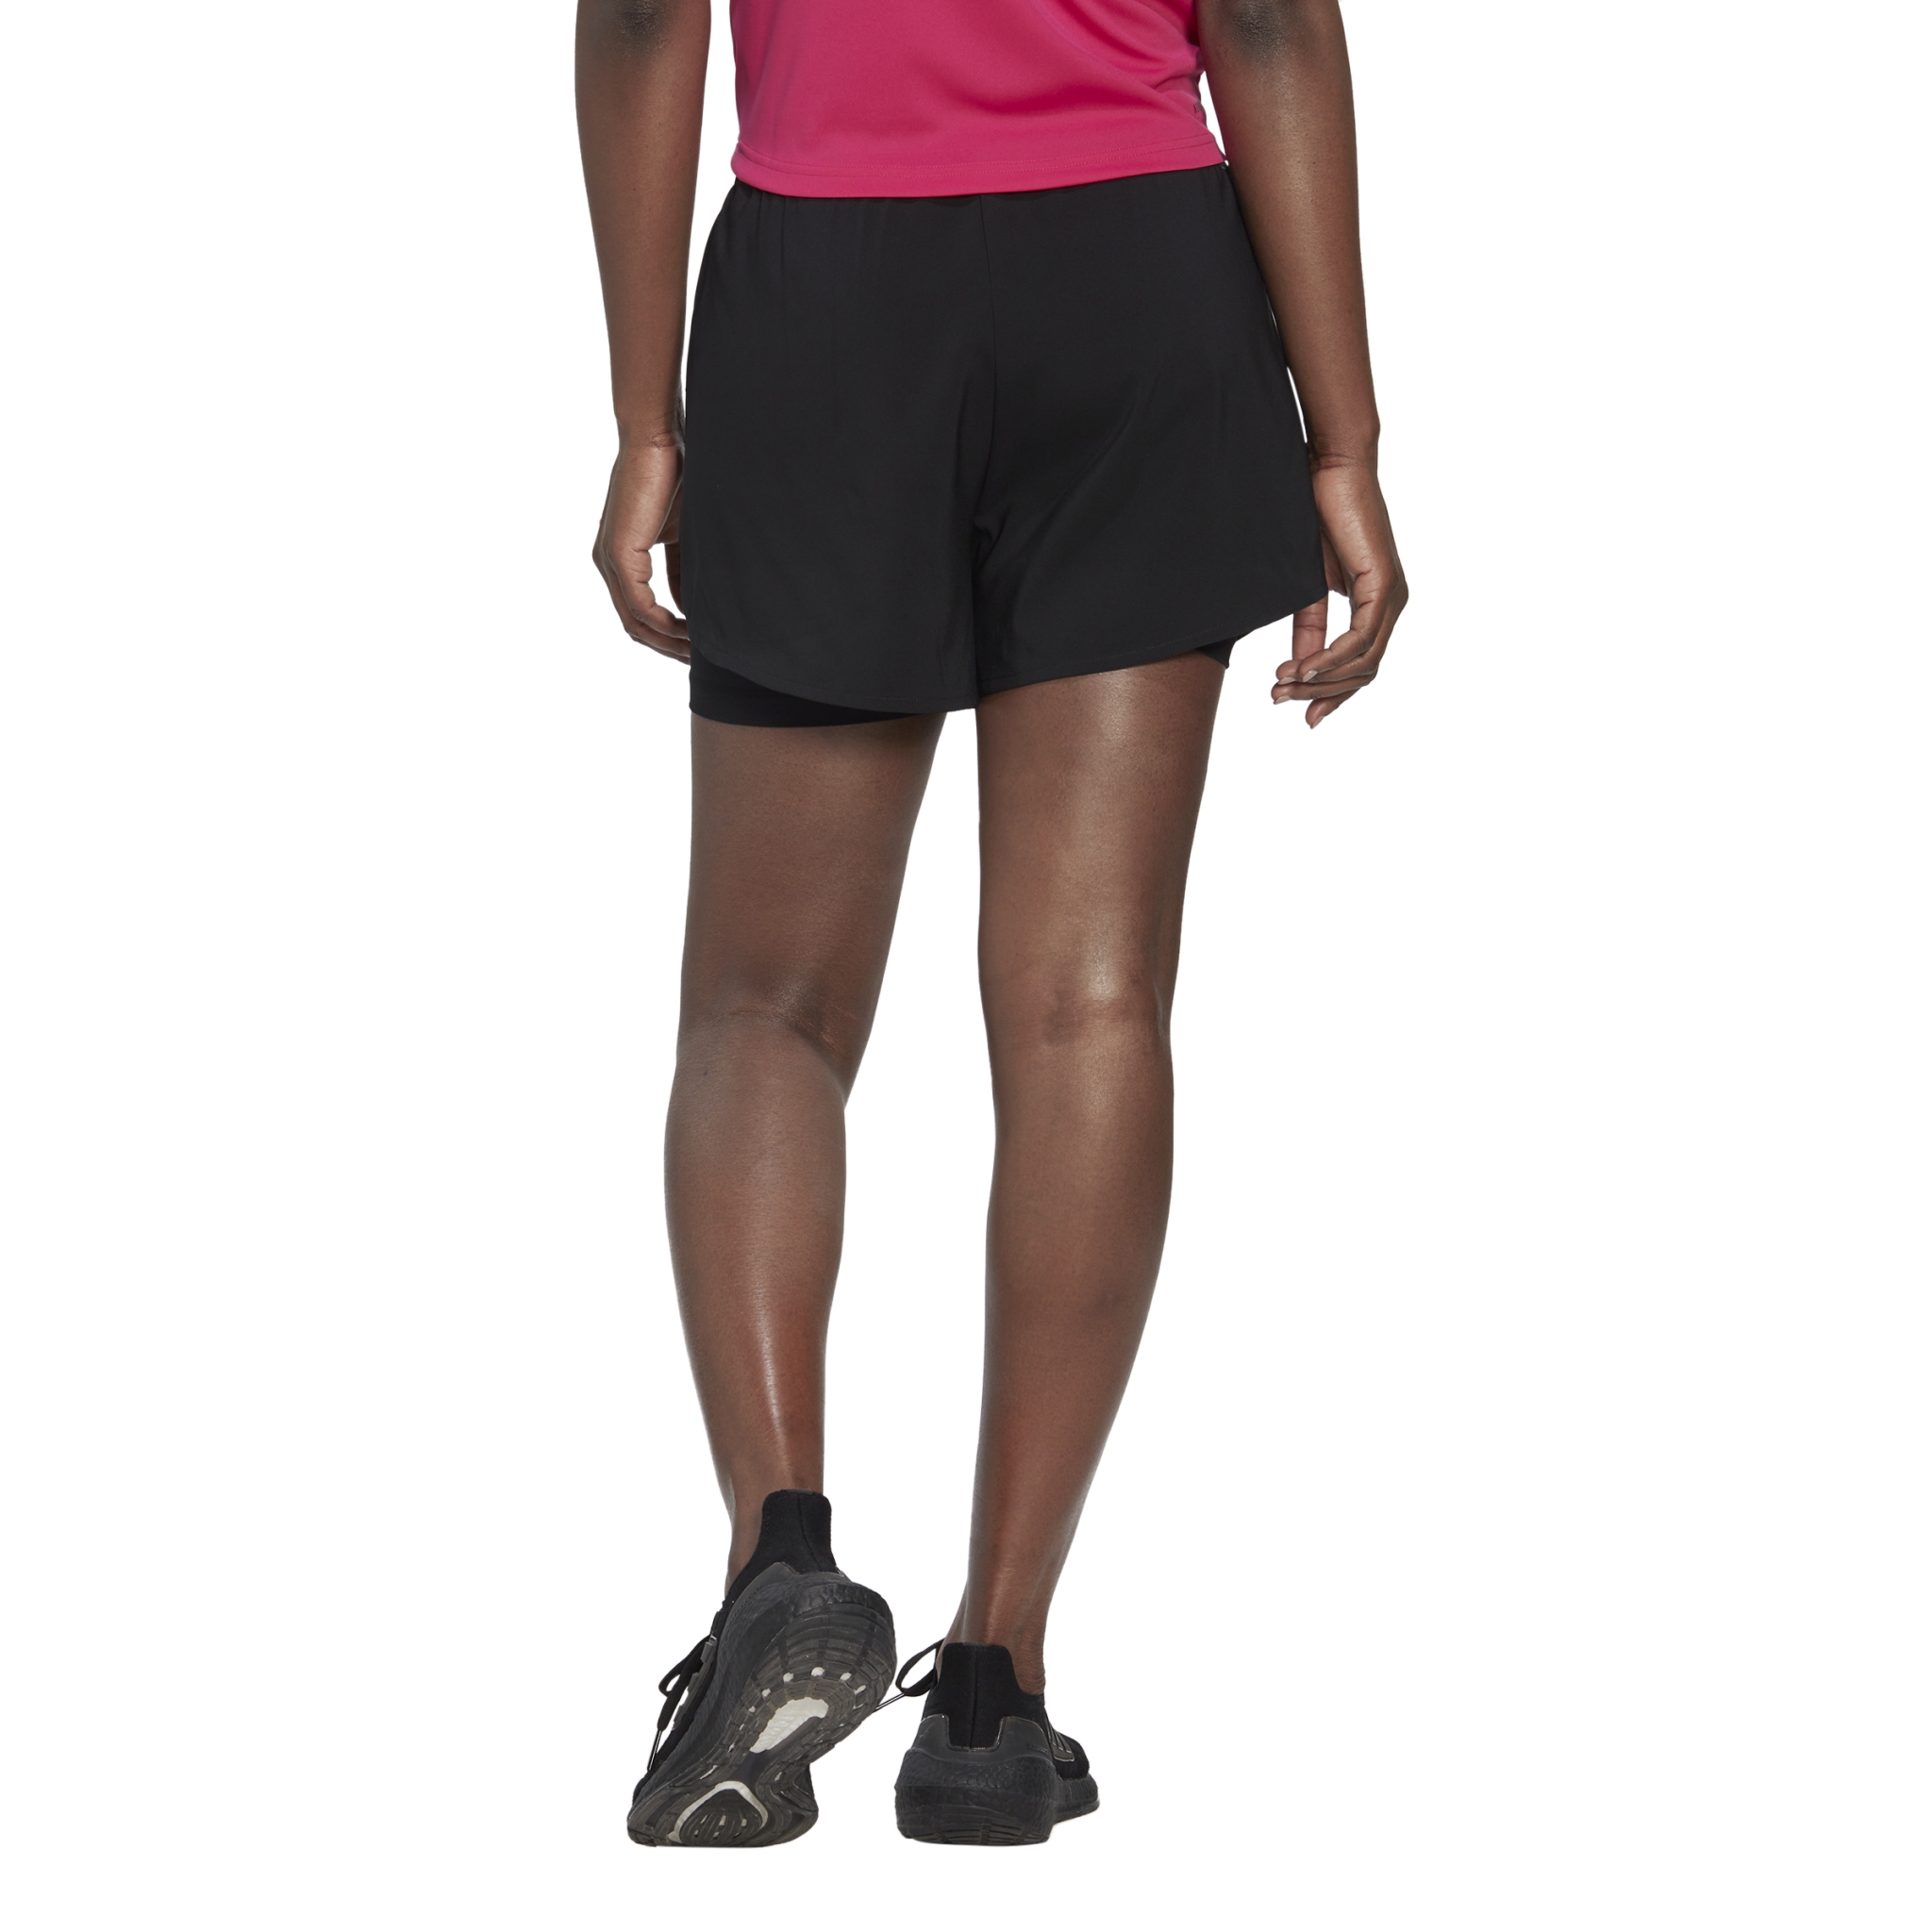 ADIDAS AEROREADY Made for Training Minimal Two-in-One Shorts 10733426